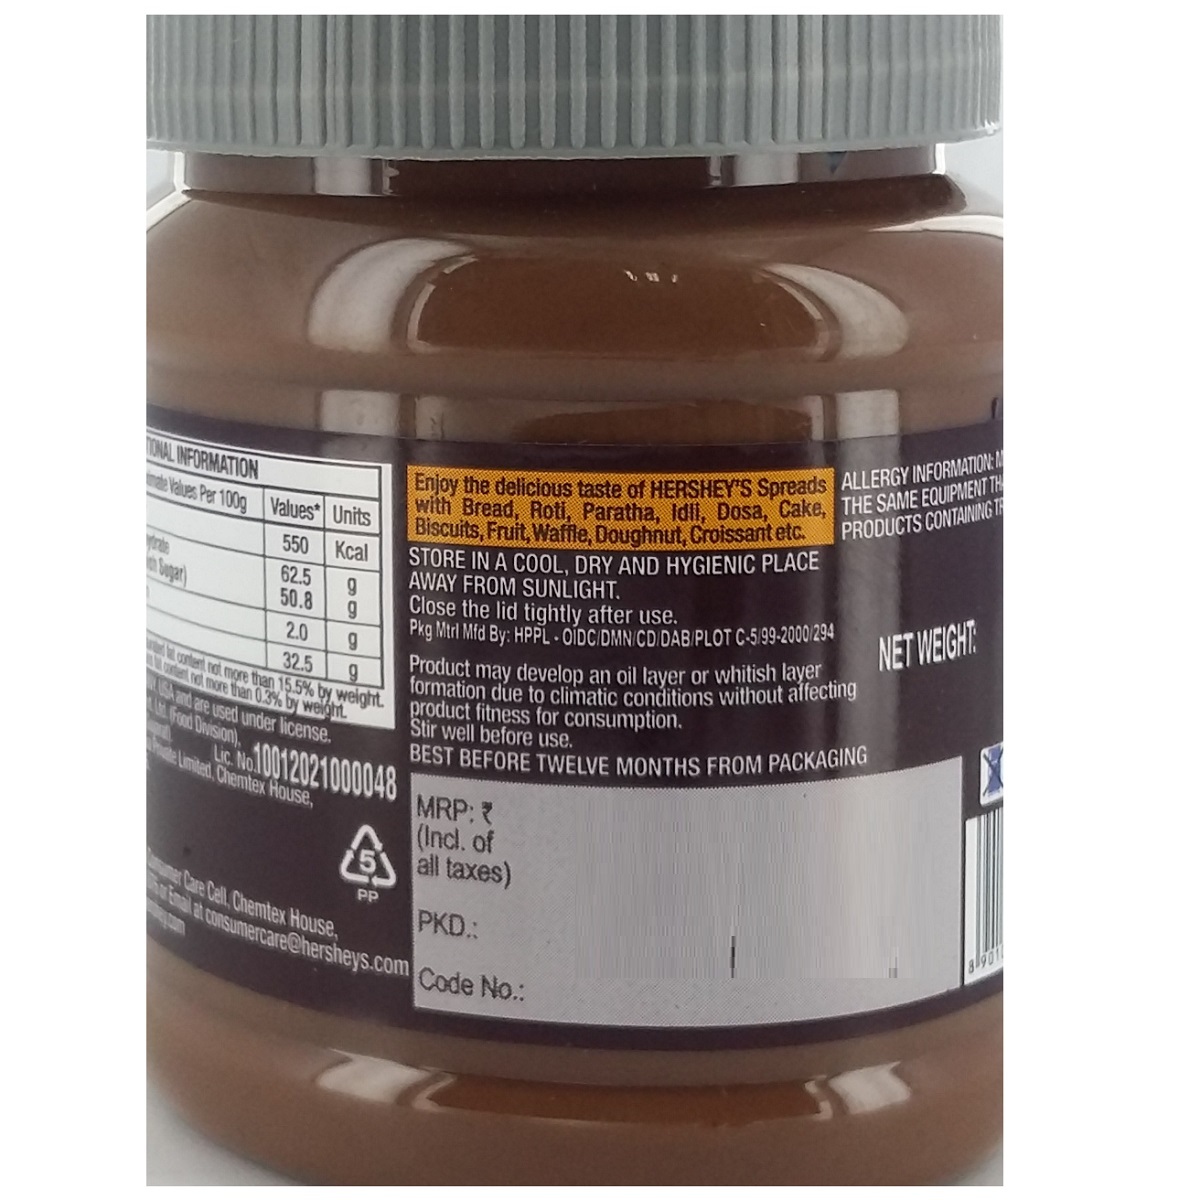 Hershey's Spreads Cocoa 135g